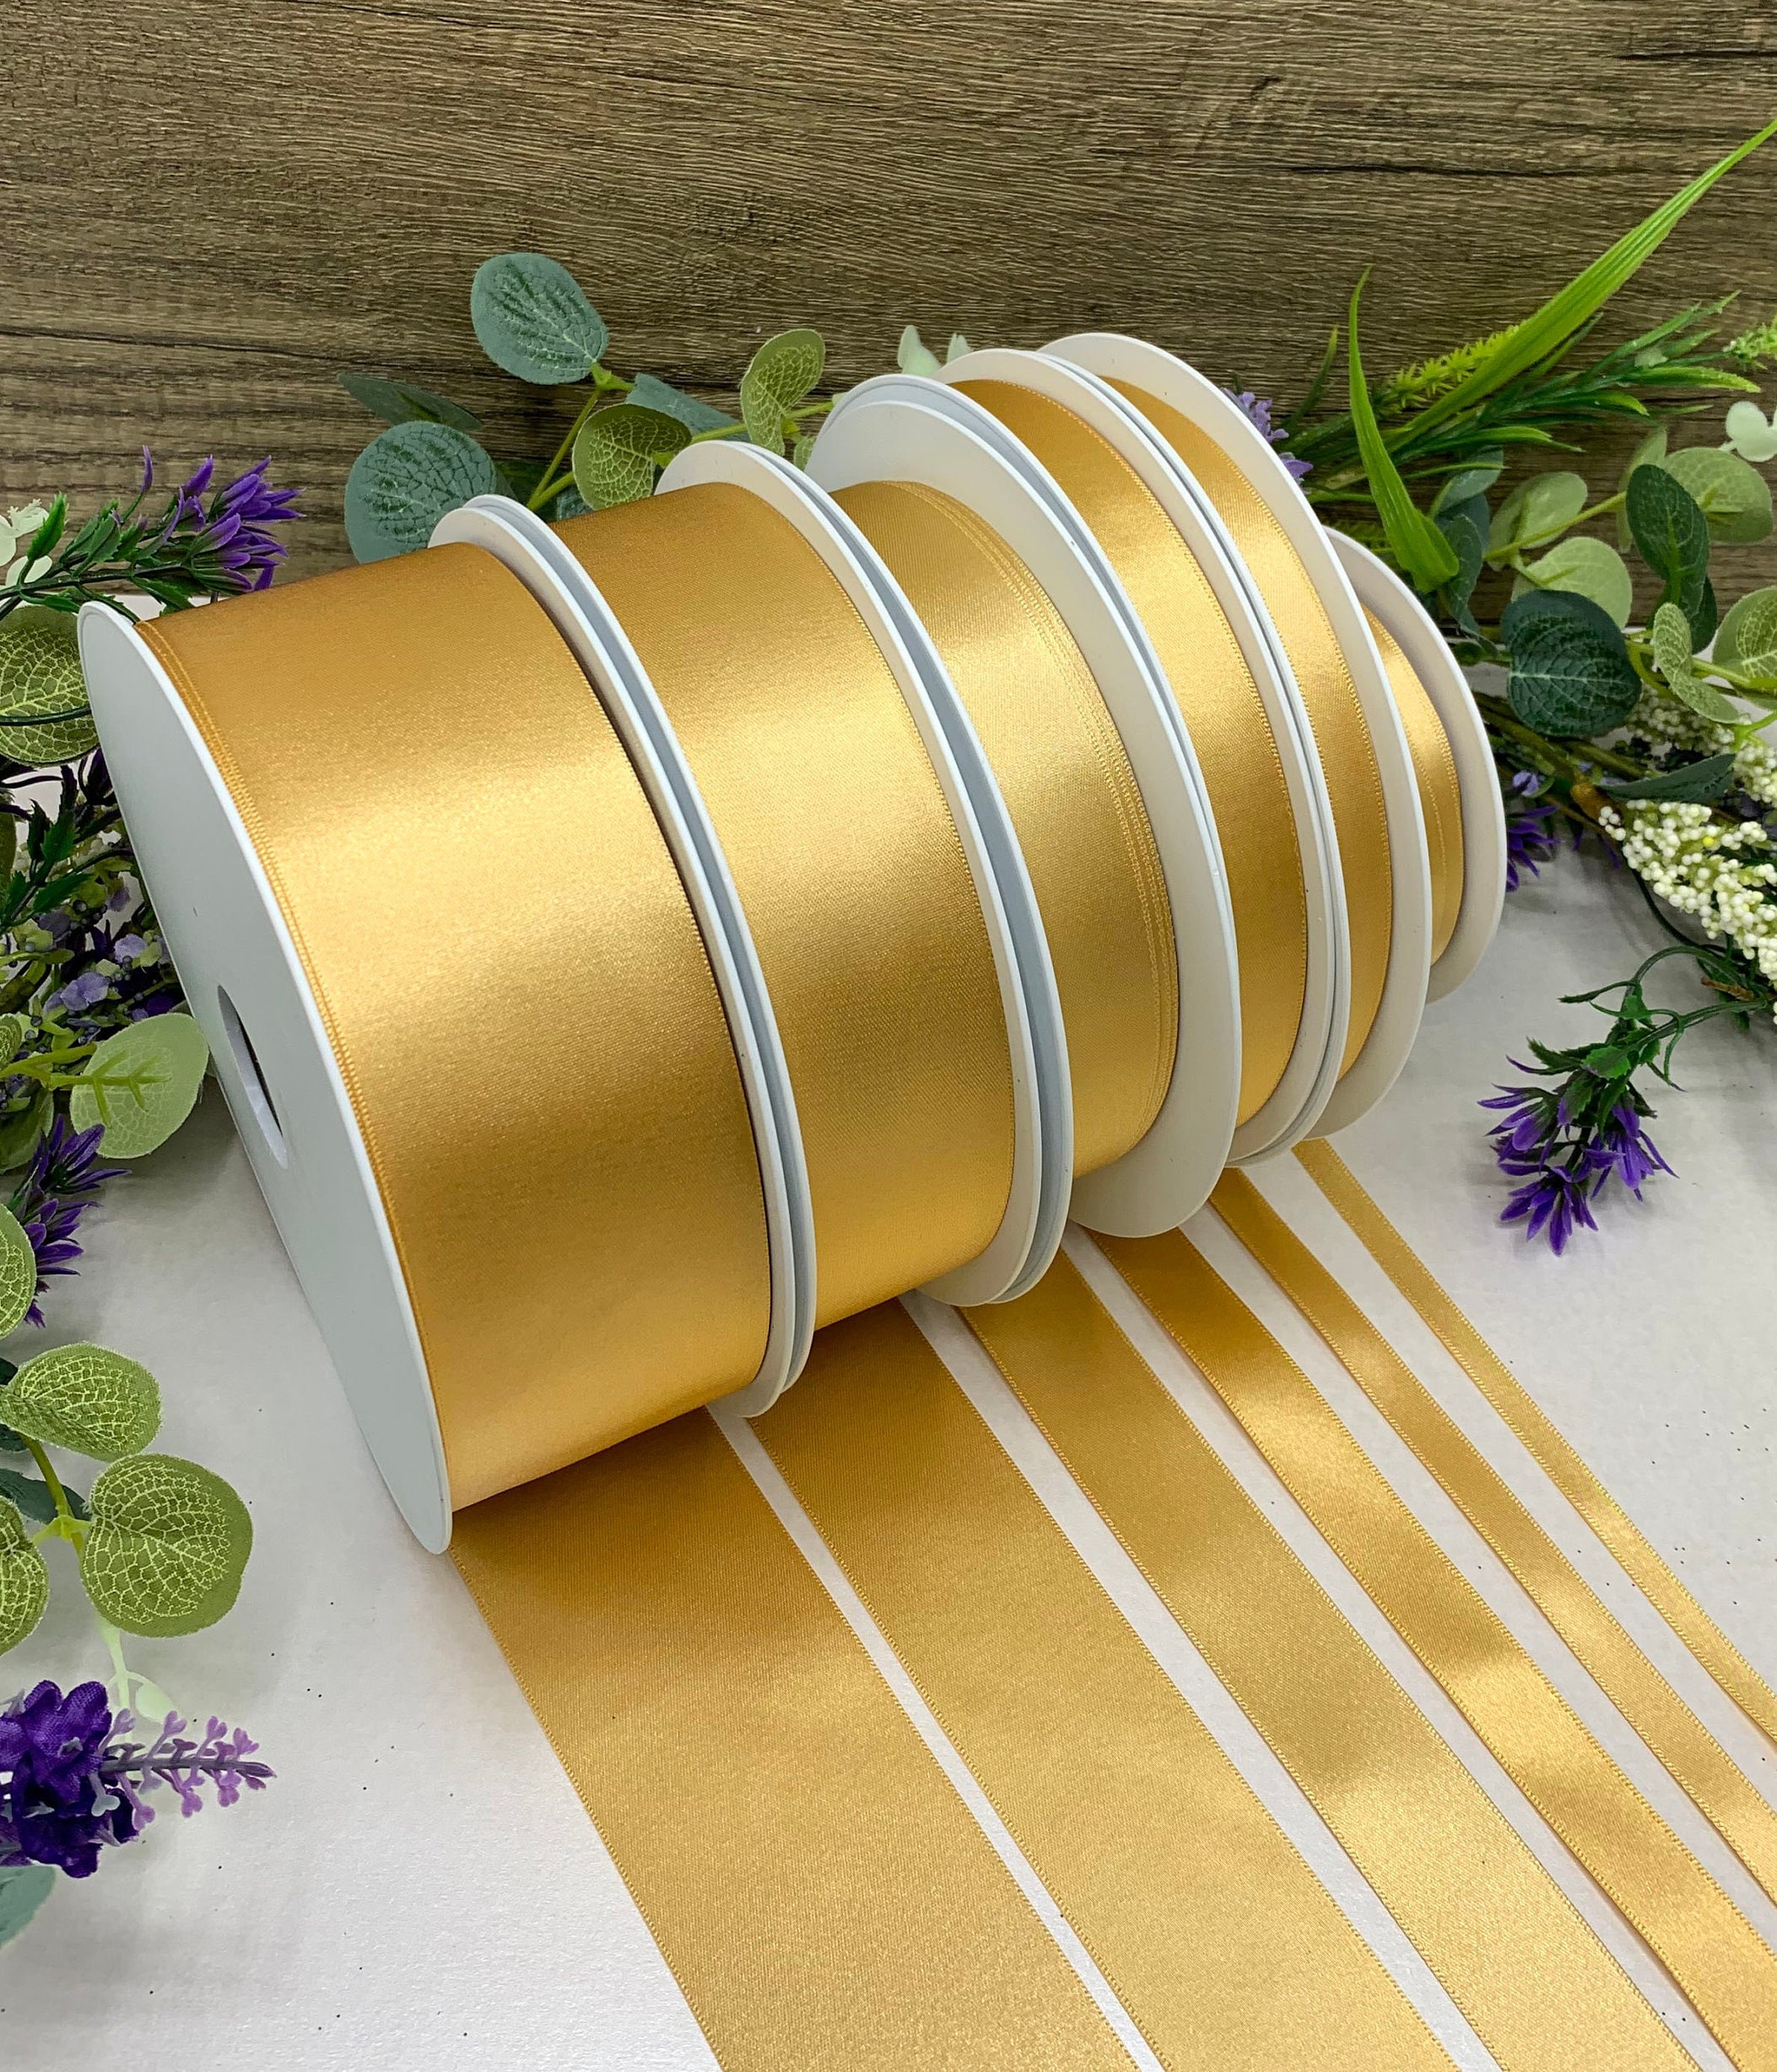  Abbaoww 50 Yards Solid Double Face Gold Satin Ribbon 1